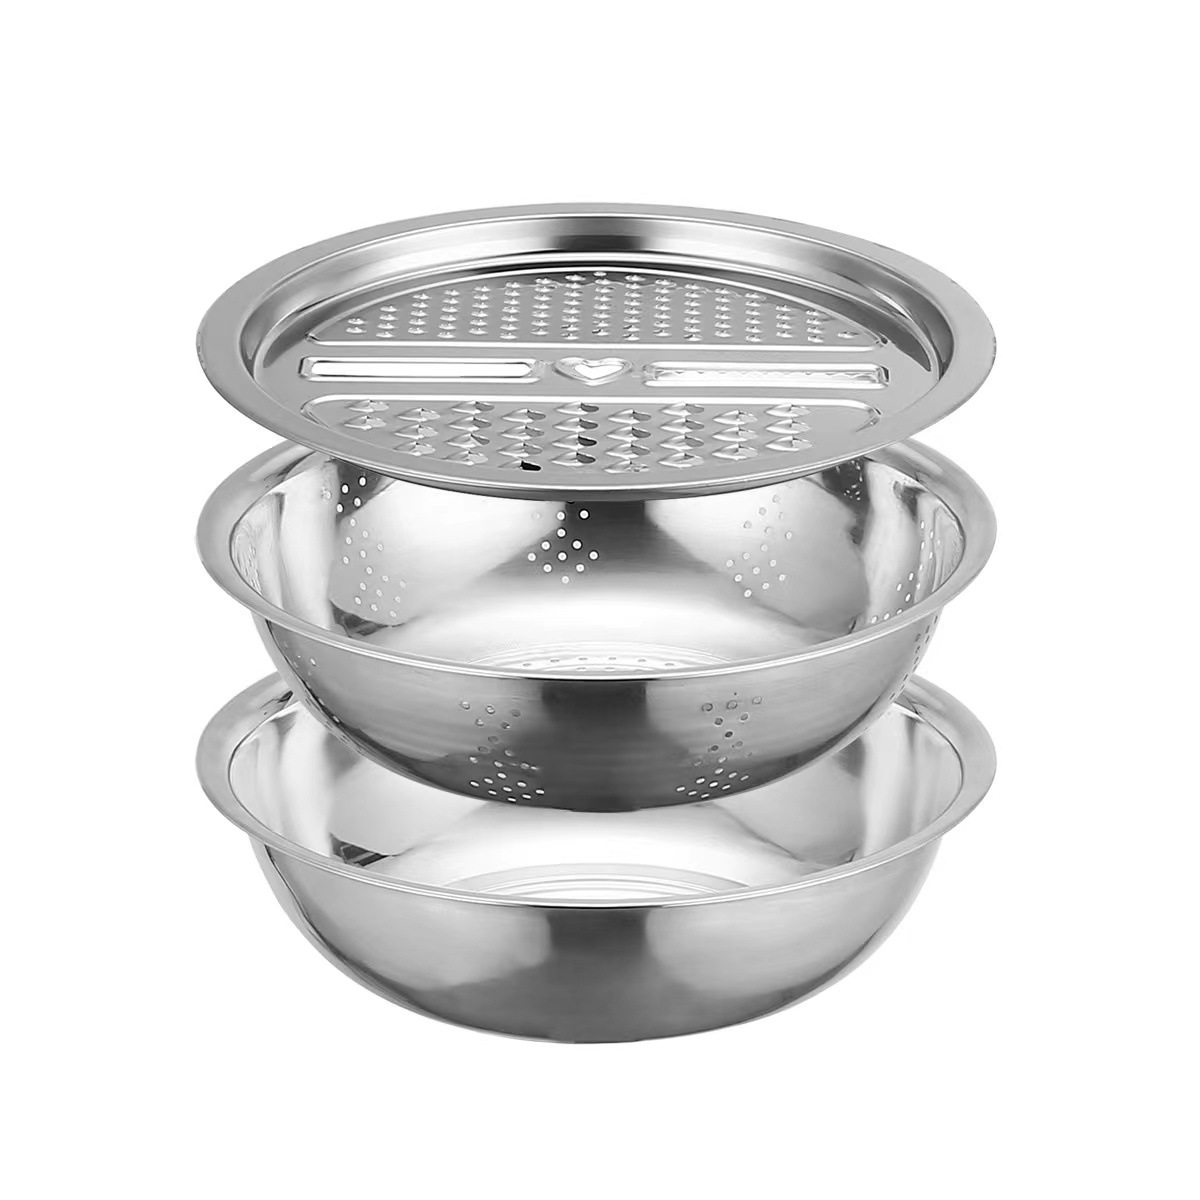 Stainless Steel Slicer Basin Three-Piece Thickened Draining Basin Home Grater Rice Washing Filter Bowl Strainer Chopper 